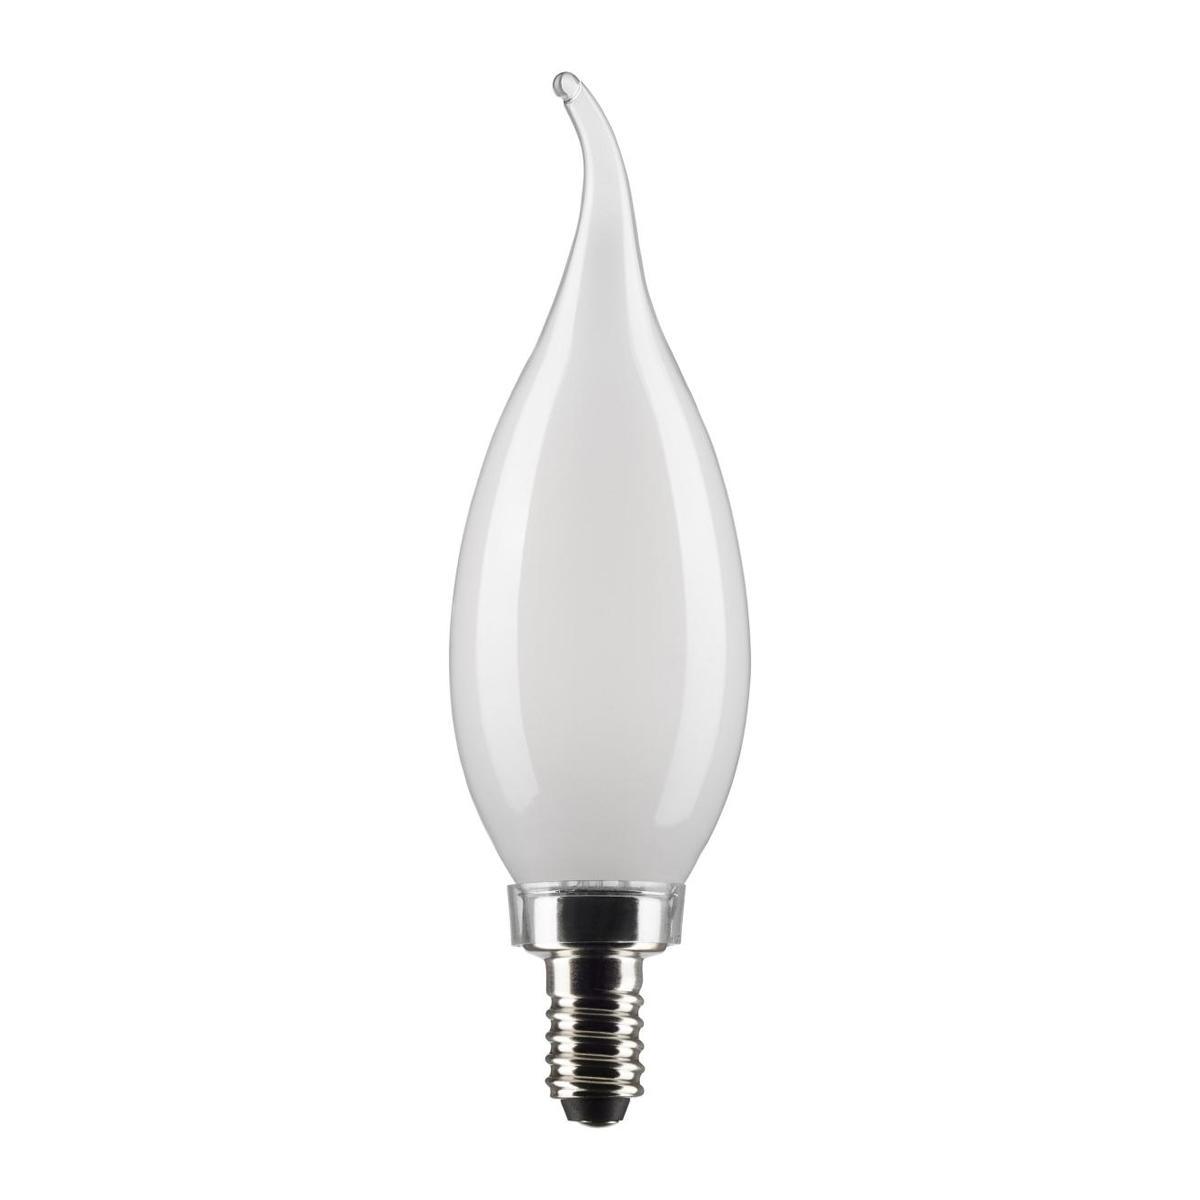 CA10 Candle LED Bulb, 40W Equivalent,4 Watt, 350 Lumens, 3000K, E12 Candelabra Base, Frosted Finish, Pack Of 2